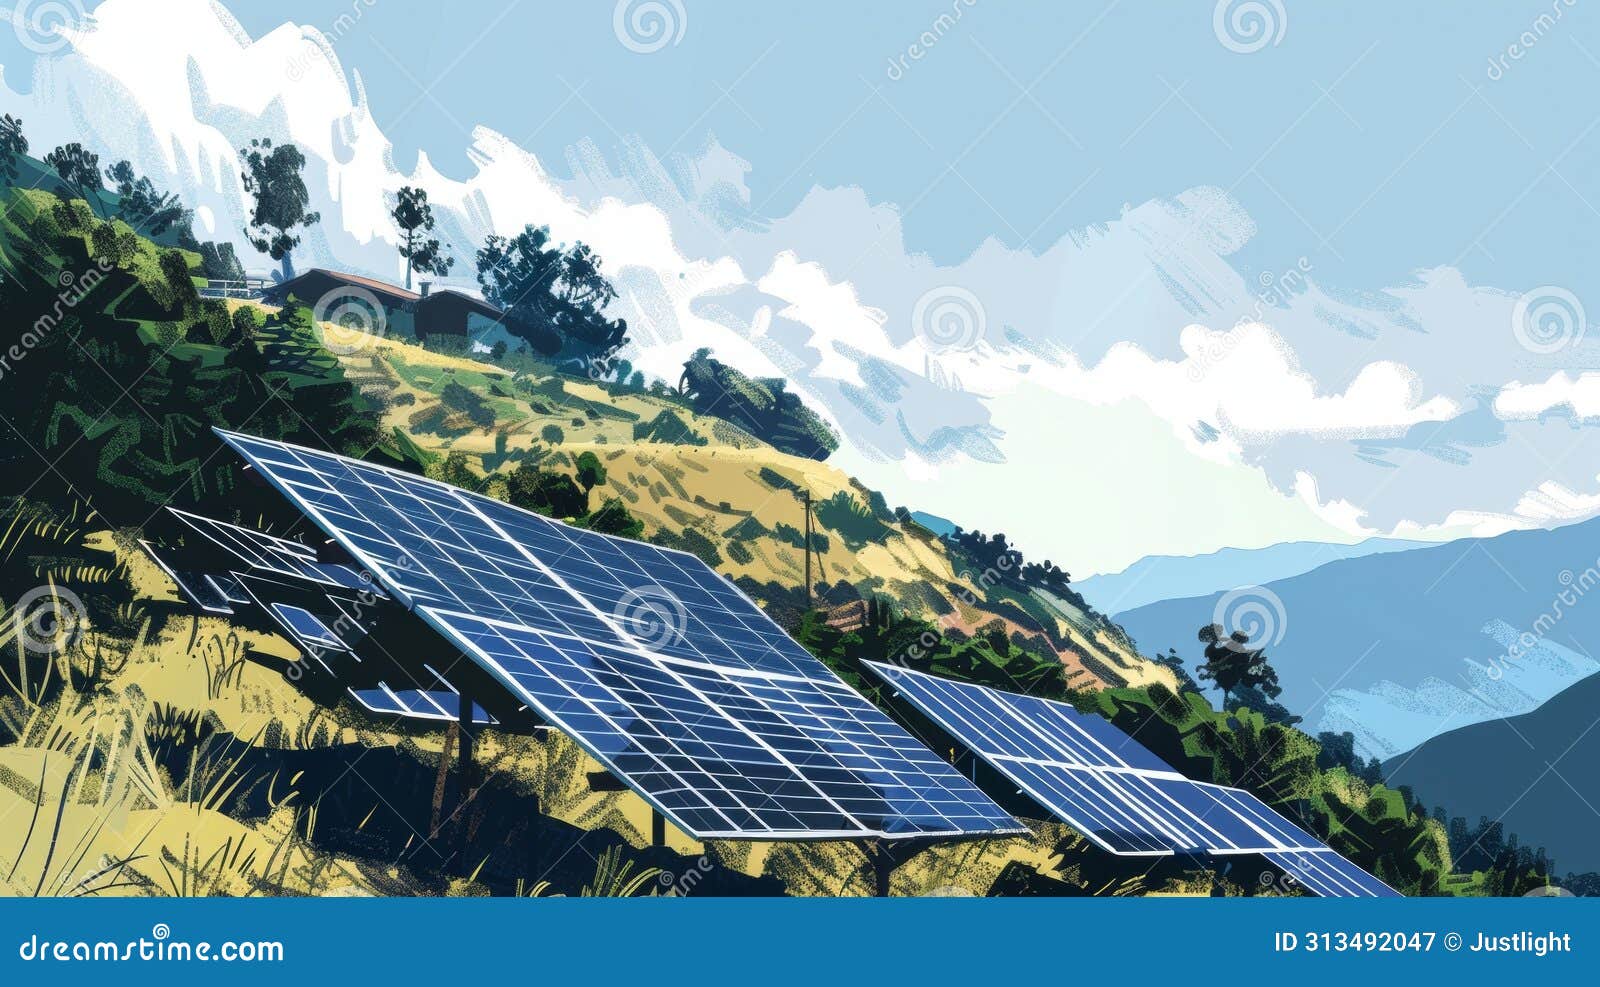 a series of solar panels positioned on the side of a mountain taking advantage of the high elevation and unobstructed